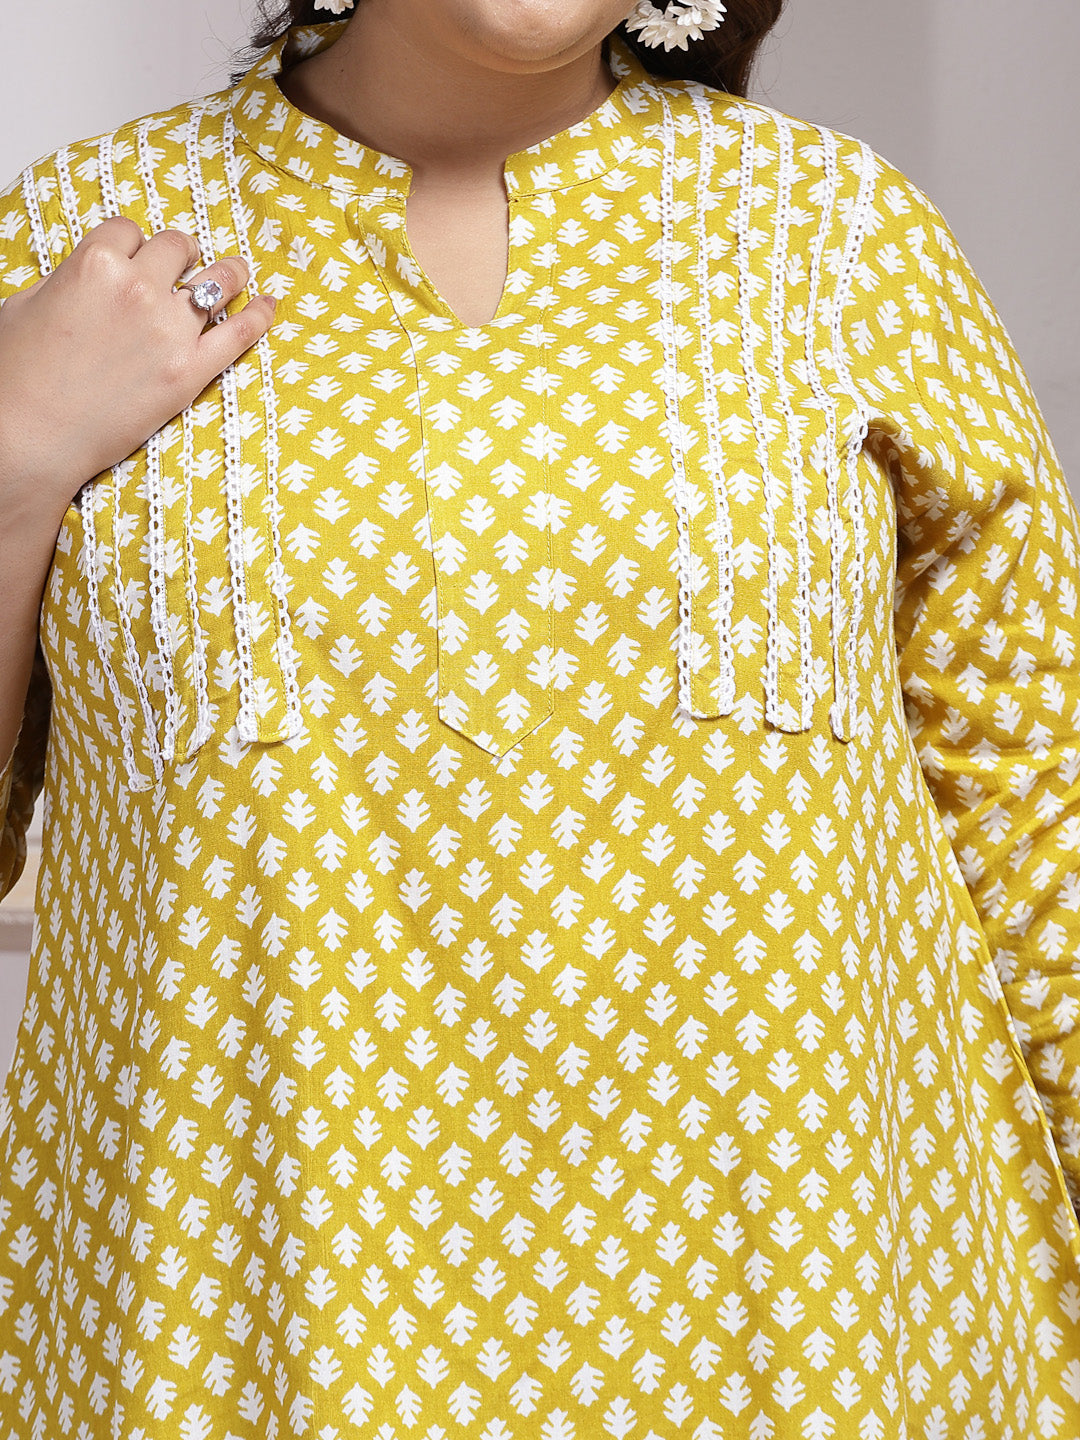 Plus Size Ethnic Motif Printed Rayon Empire Top